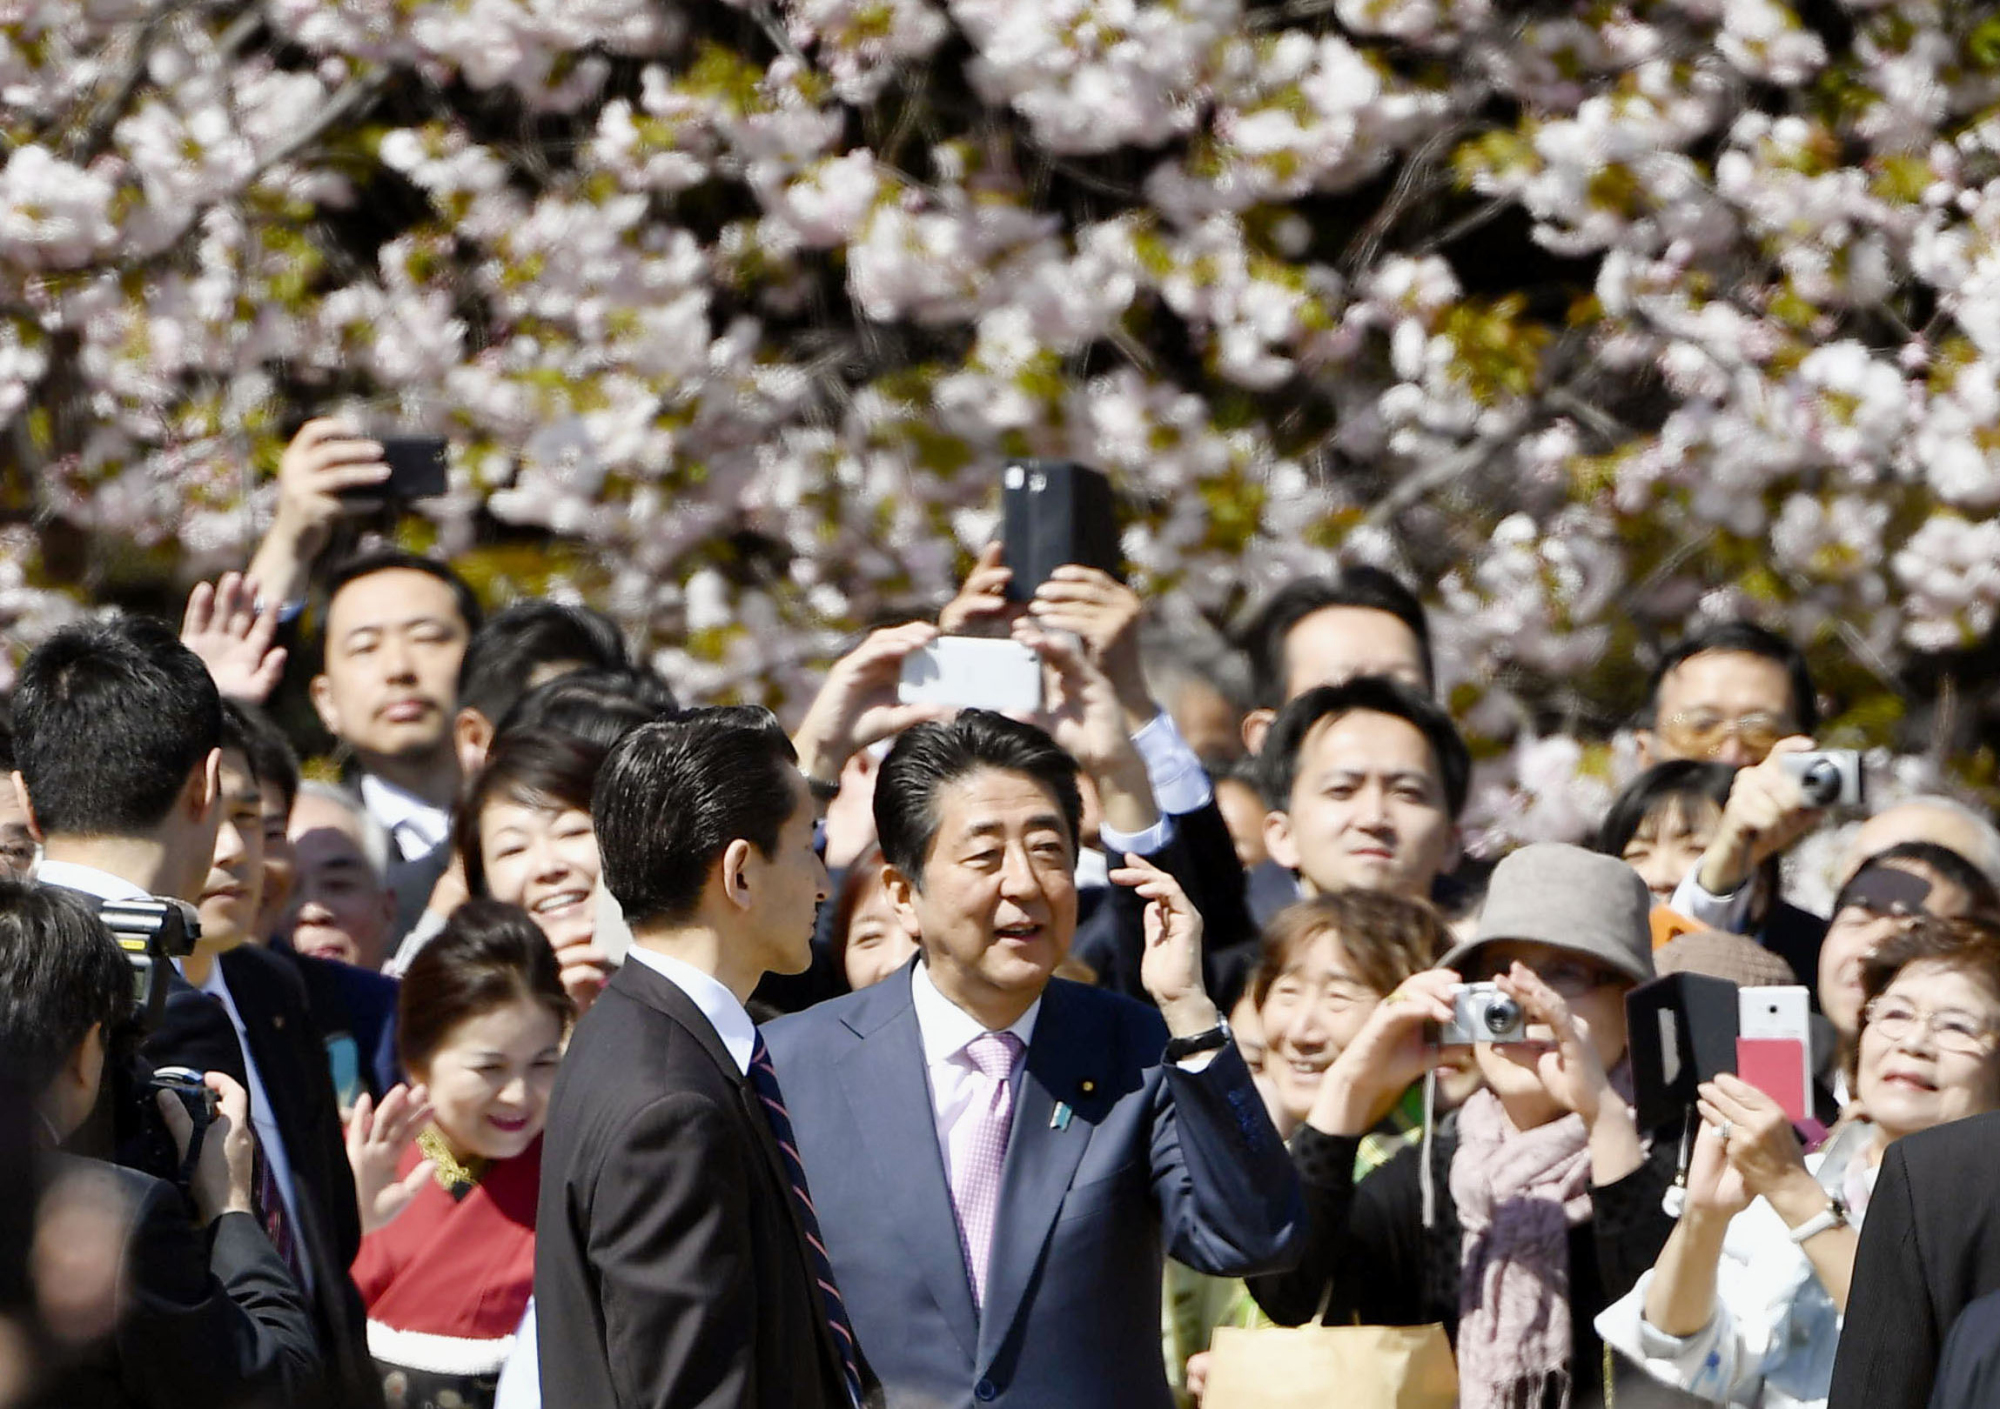 Prime Minister Shinzo Abe is surrounded by guests during a cherry blossom-viewing event in April in Tokyo. | KYODO